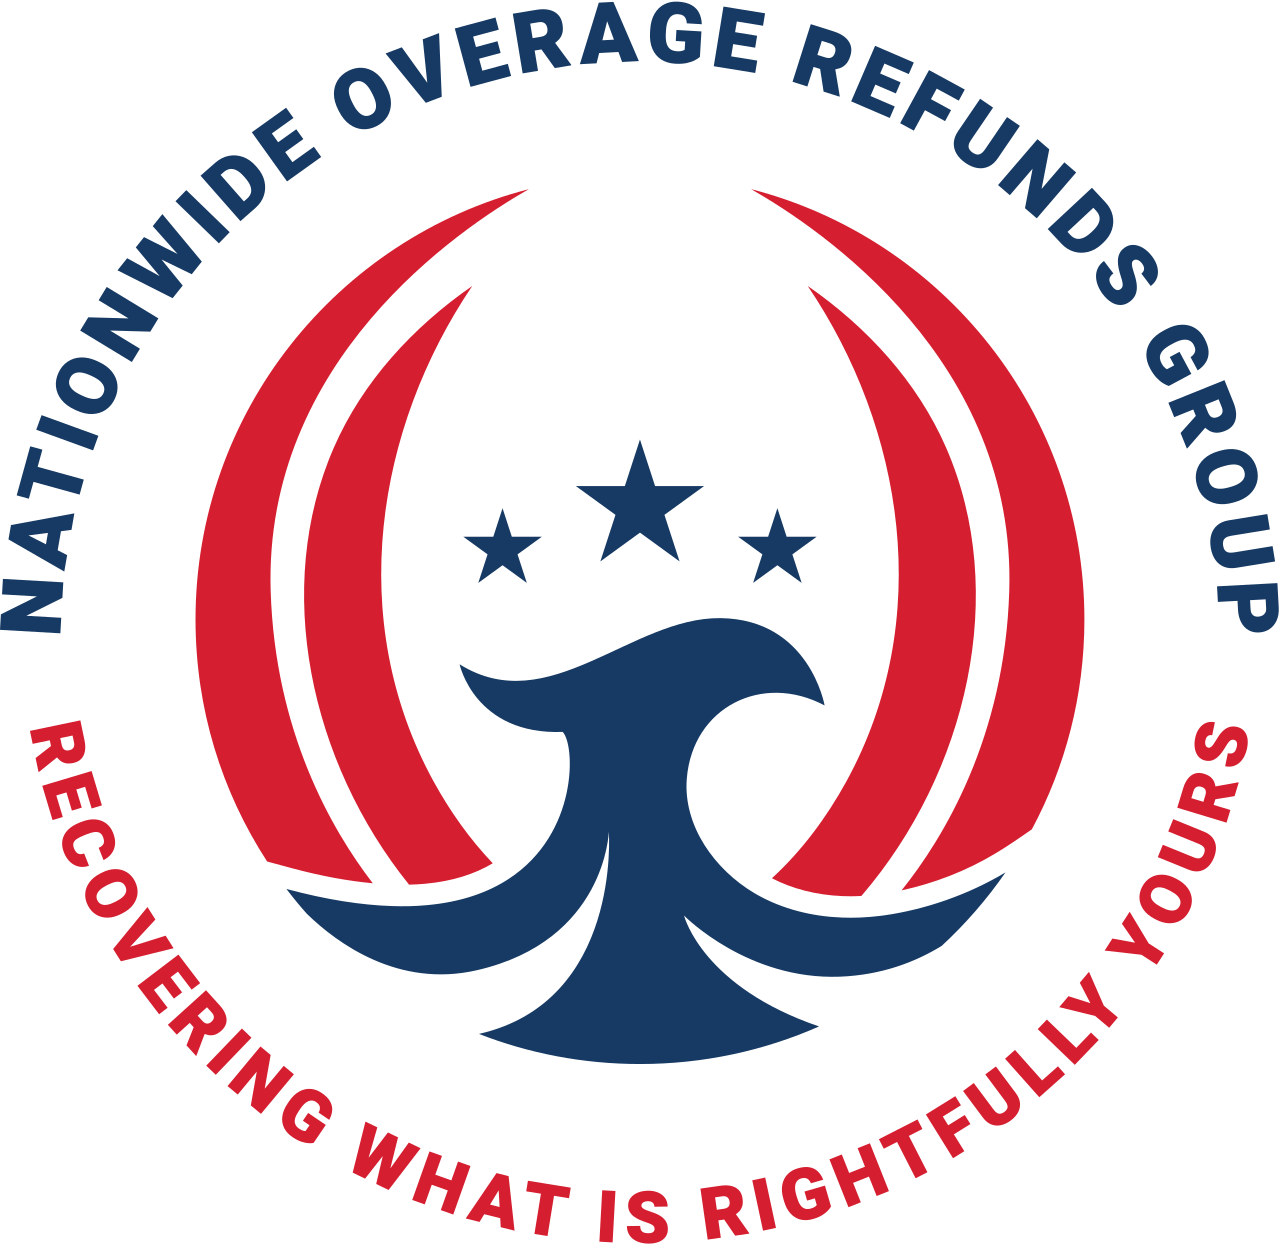 NATIONWIDE OVERAGE REFUNDS GROUP's logo